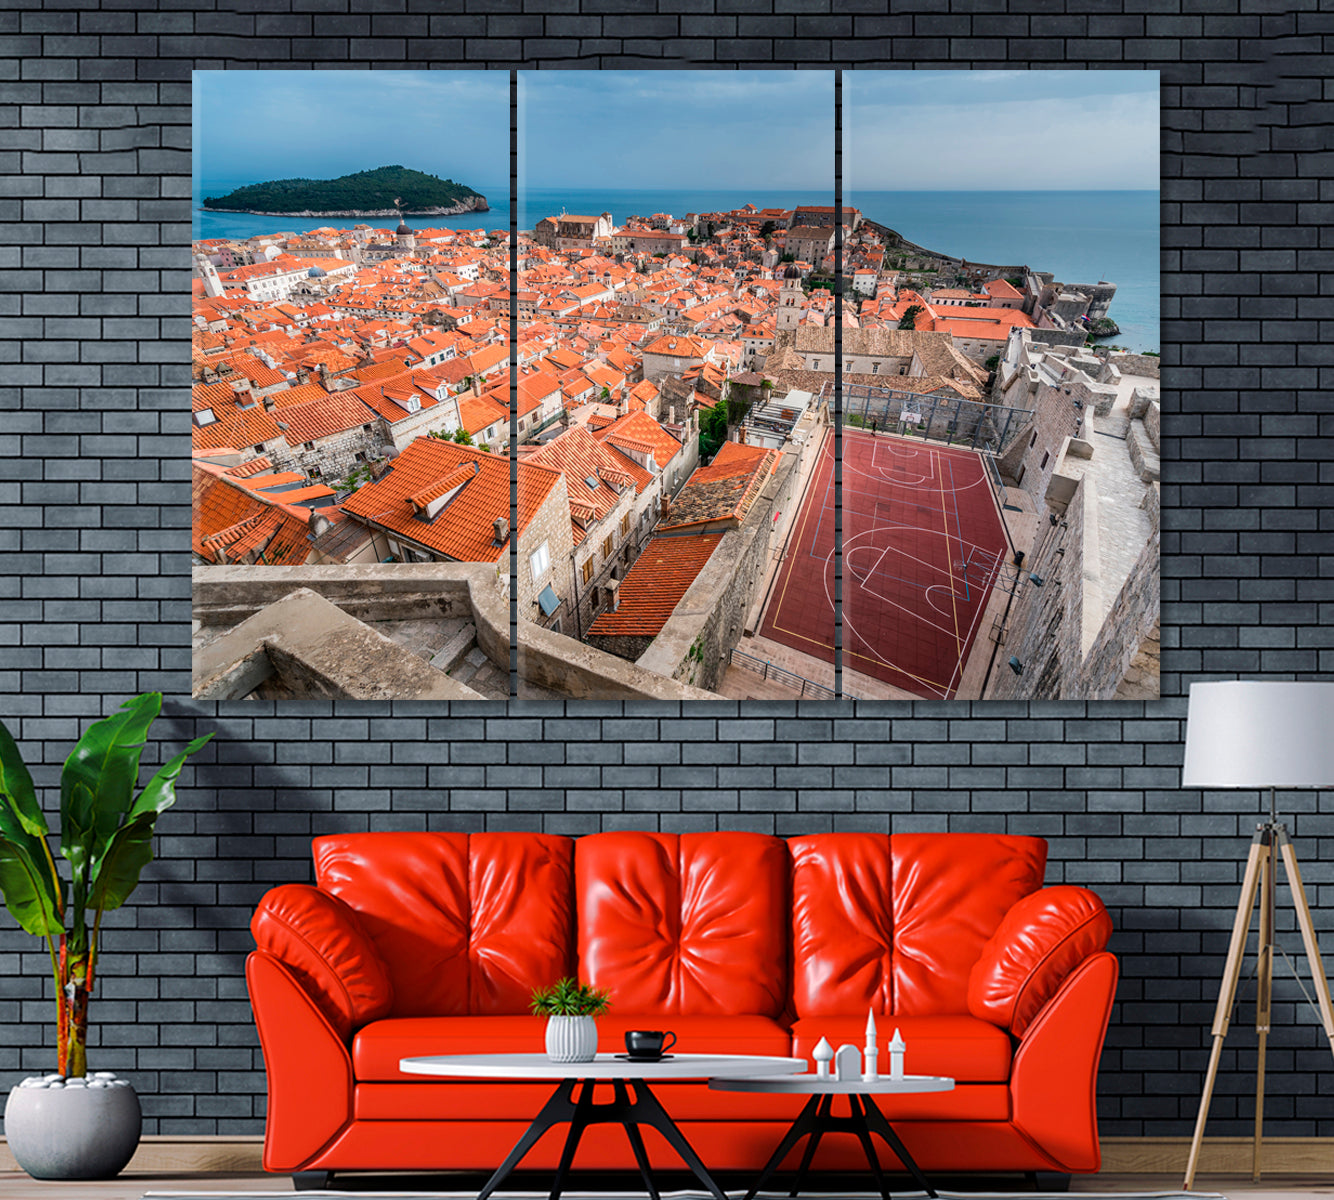 Basketball Court in Dubrovnik Croatia Canvas Print ArtLexy 3 Panels 36"x24" inches 